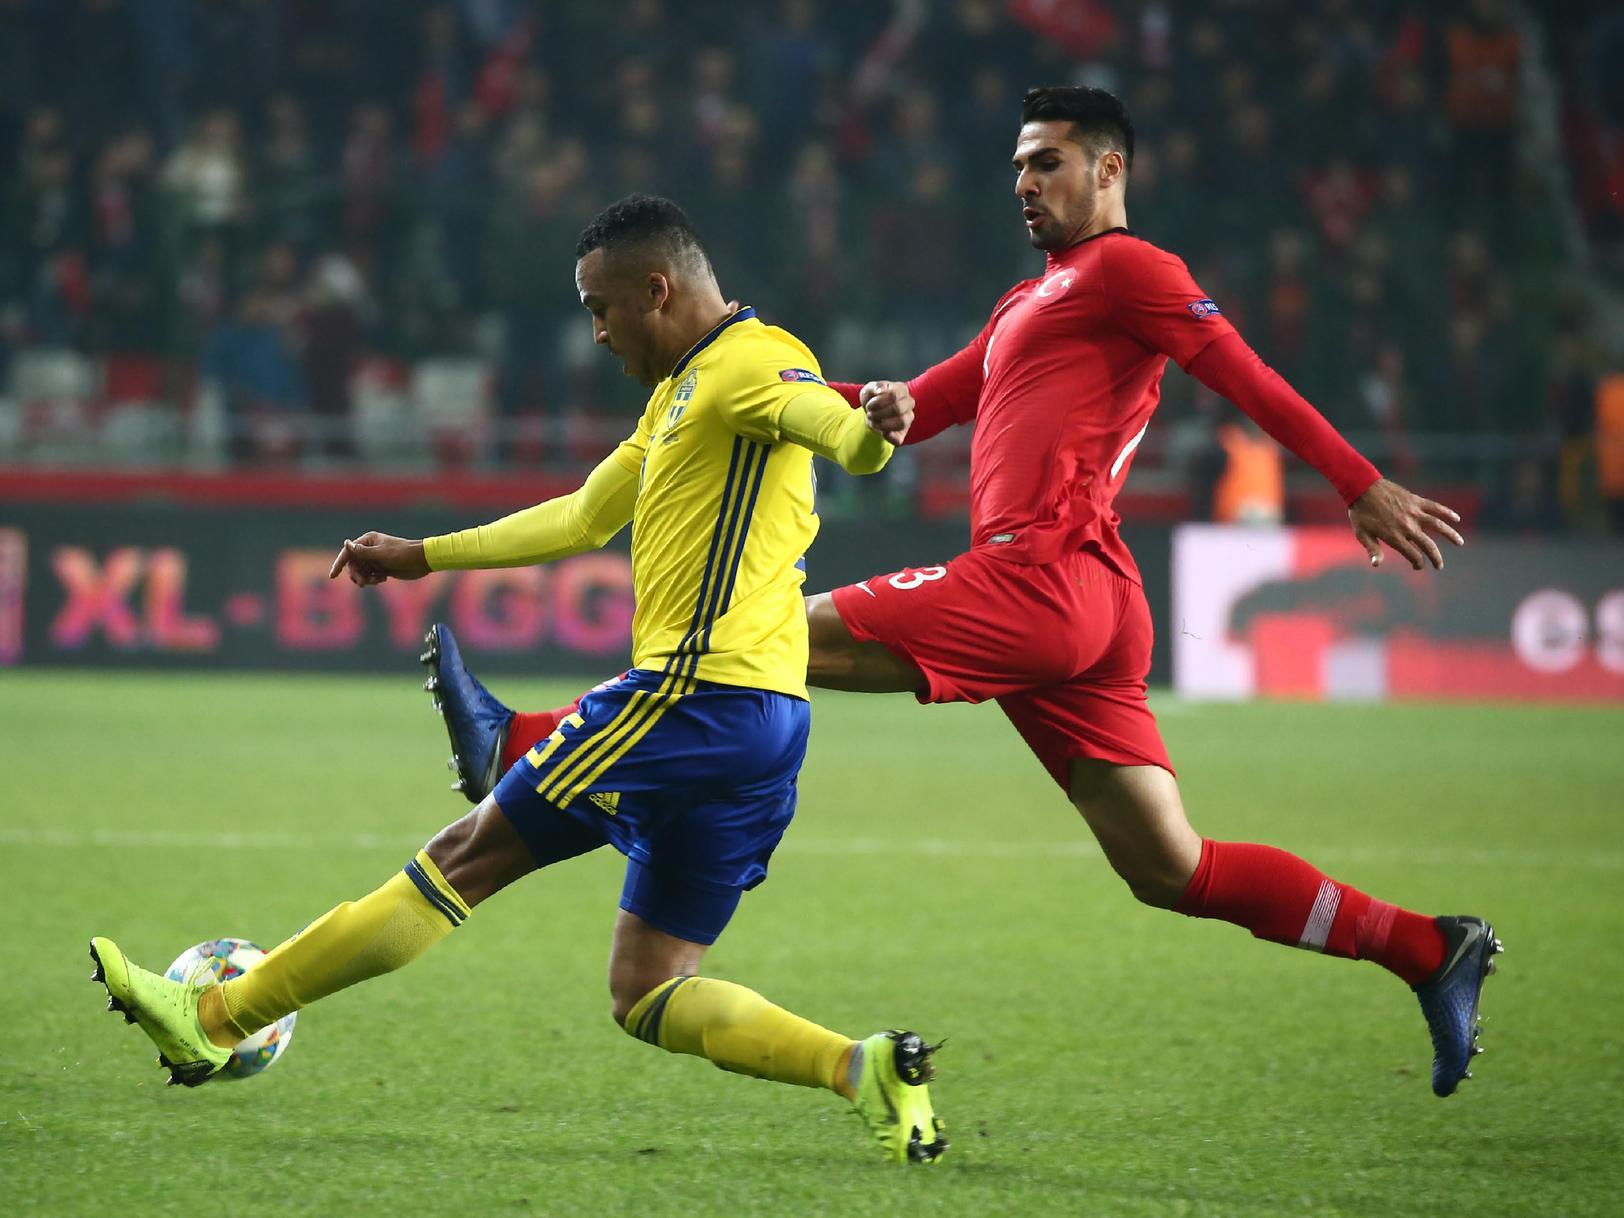 West Bromwich Albion targetMartin Olsson is understood to be training with Swedish side Helsingborgs IF, as he looks to secure a new club in the summer transfer window. (Sport Witness)